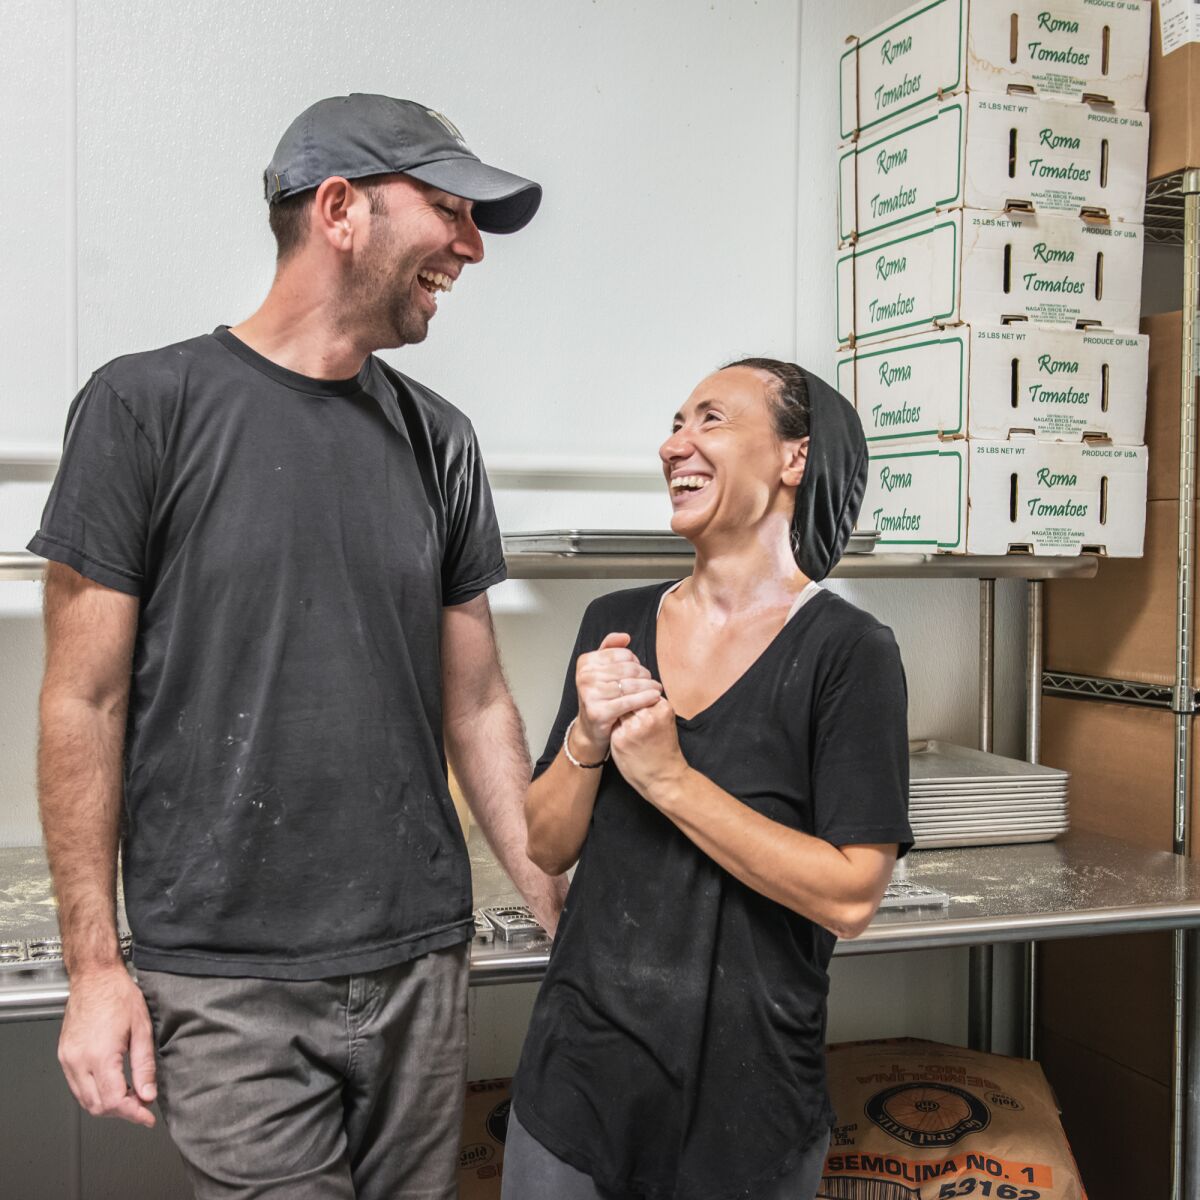 Eric Clark and Tina Scaccio crafted their own recipe for 100 percent semolina pasta and began selling it at San Diego farmers markets in 2012. Close to Home pastas are now available in stores.